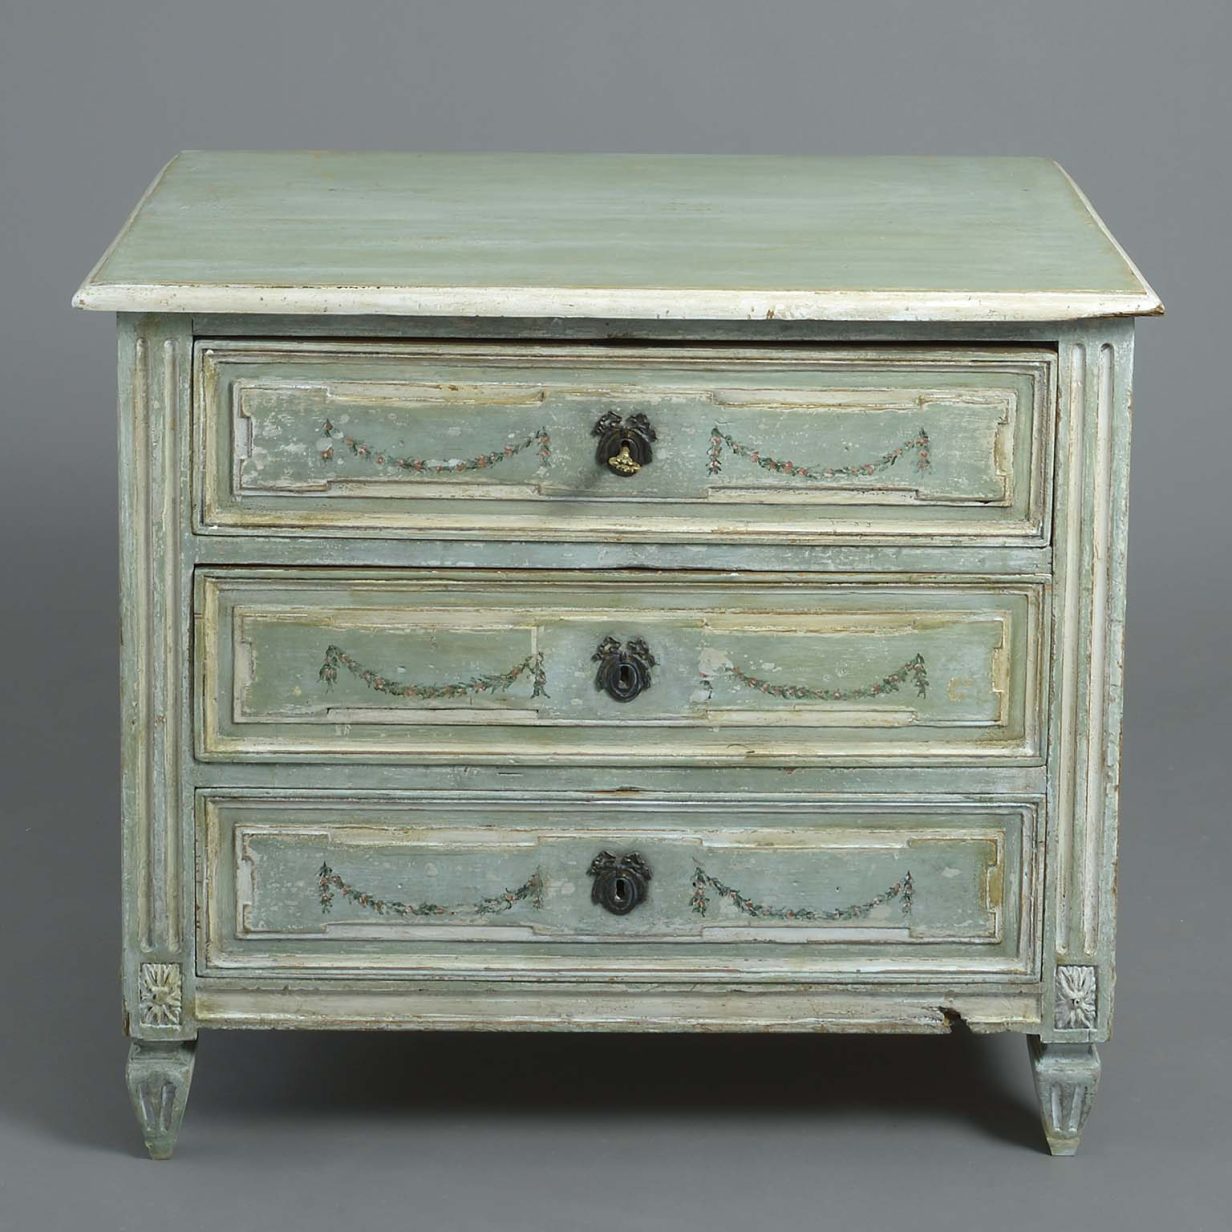 Late 18th century gustavian painted commode